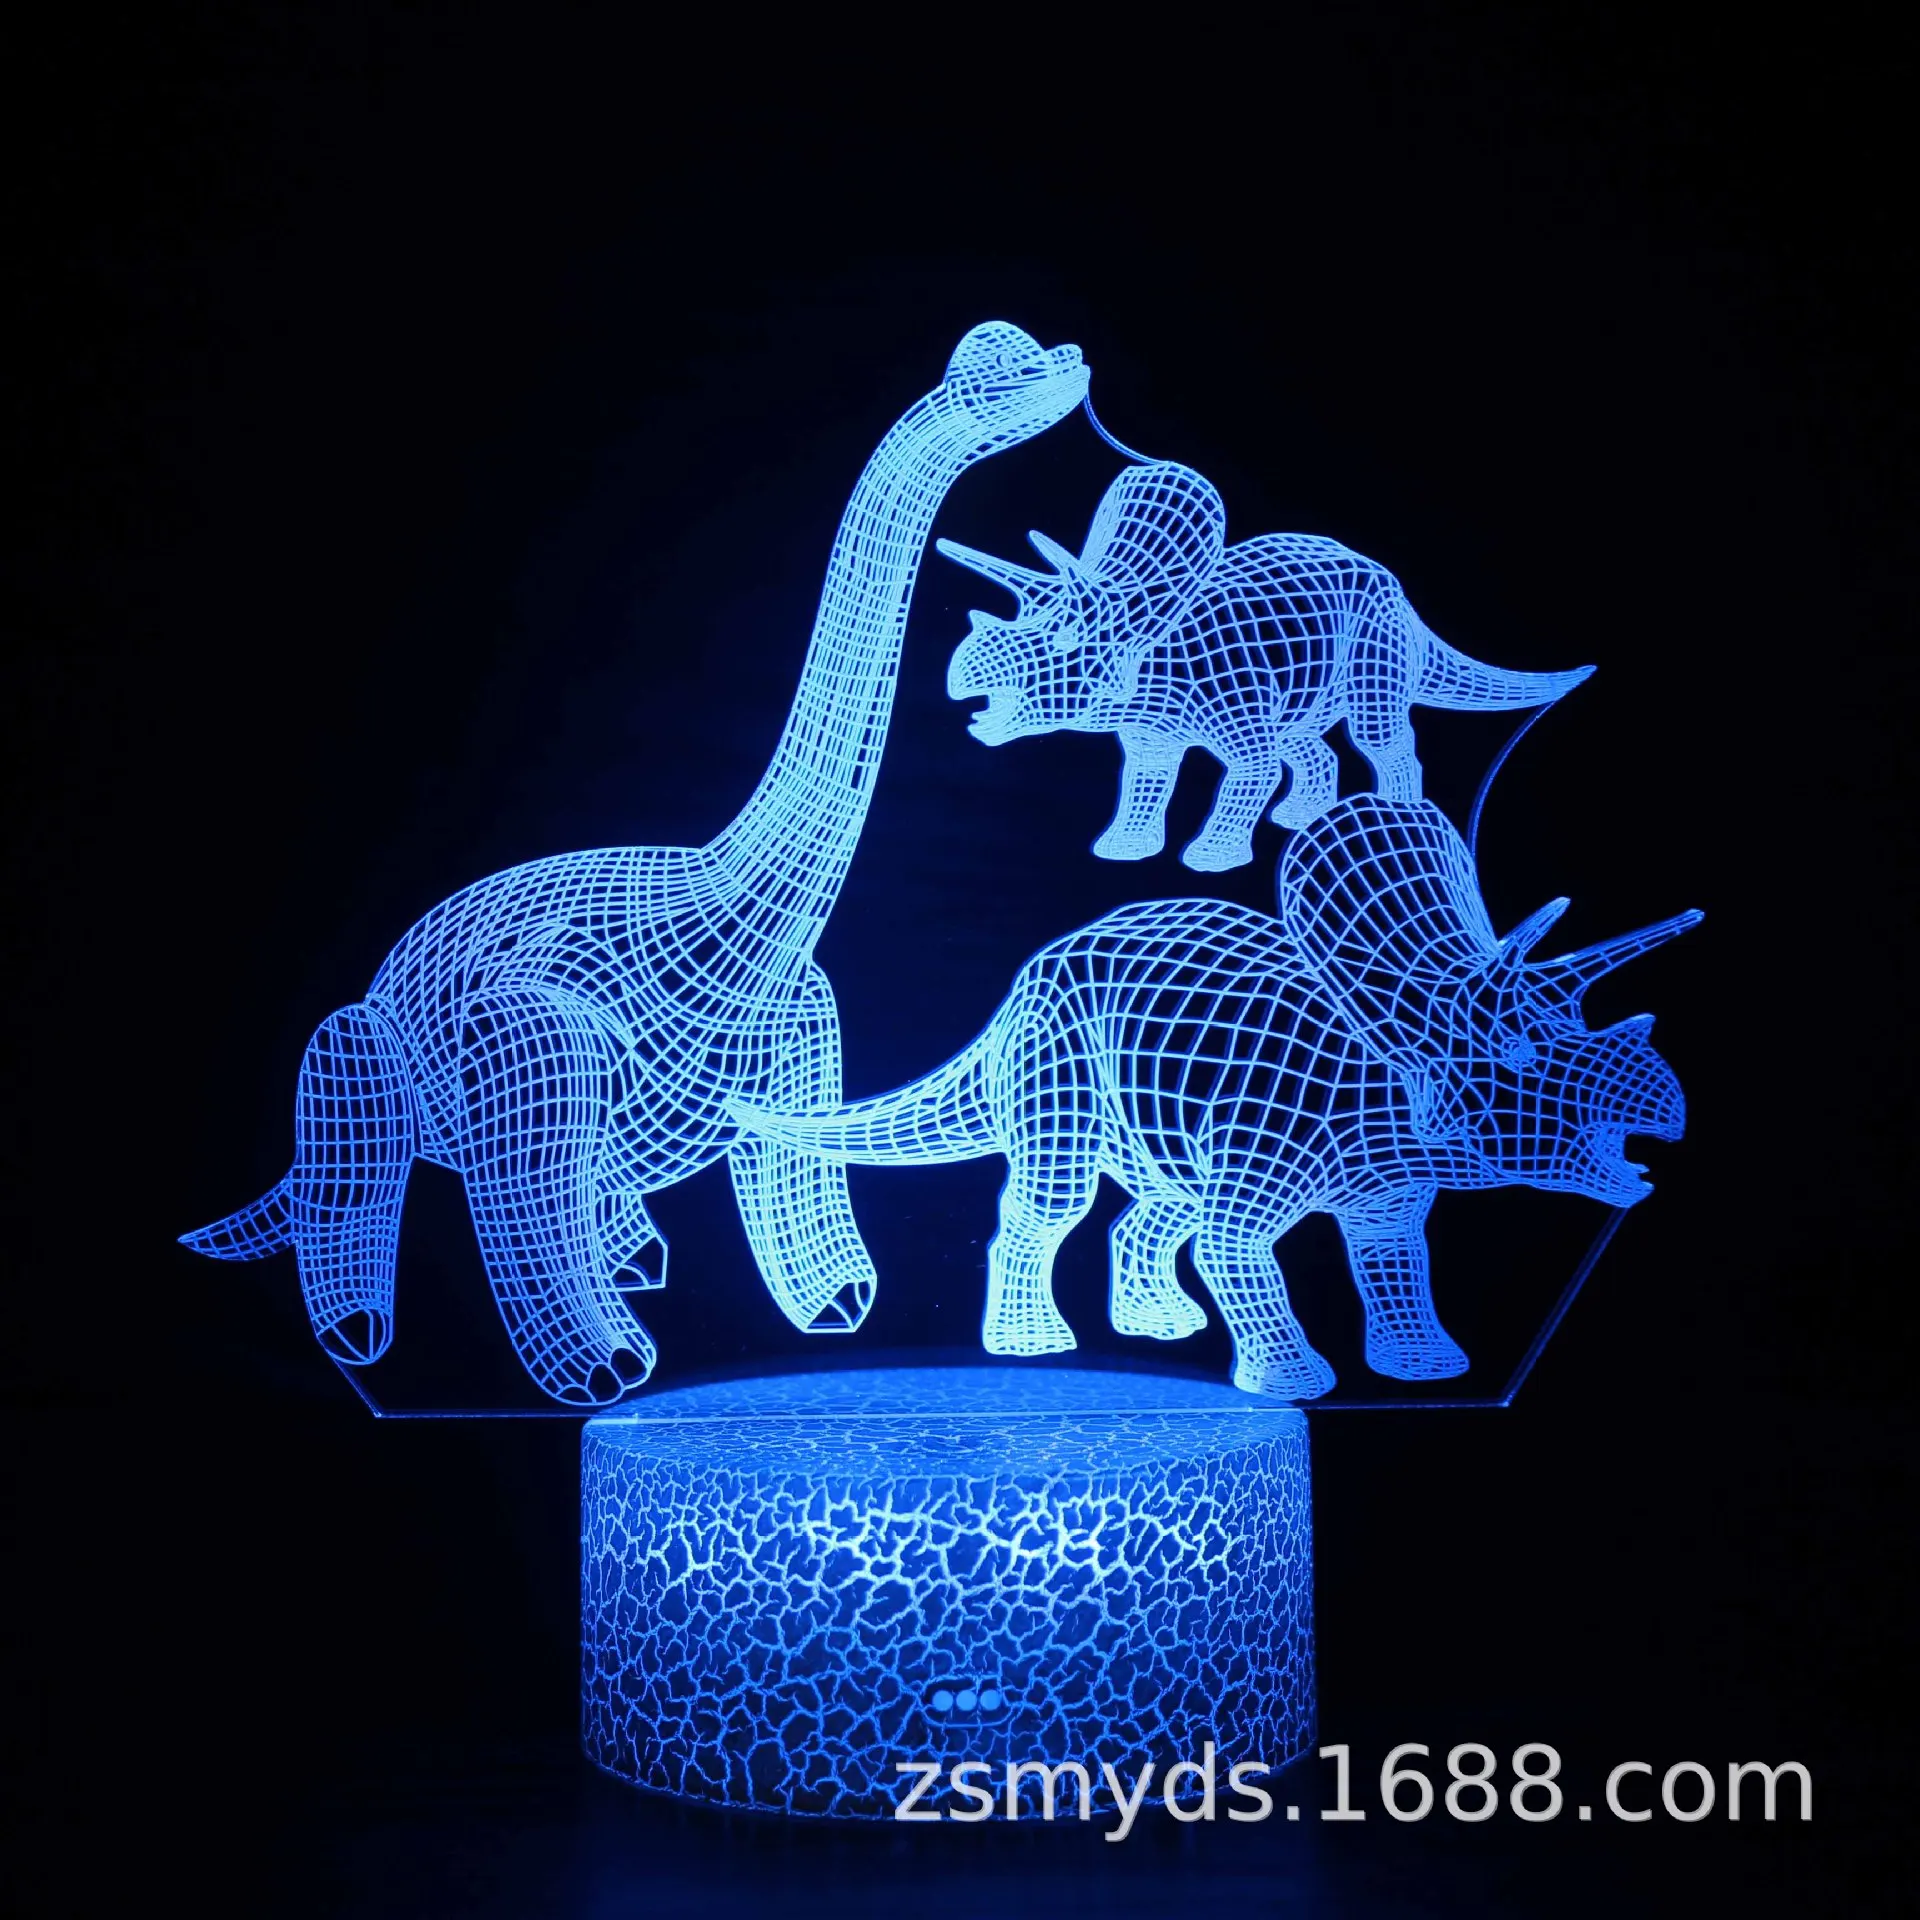 

3D LED Night Light Lamp Dinosaur Series 7Color 3D Night light Touch Control Table Lamps Toys Gift For kid Home Decoration Lamp